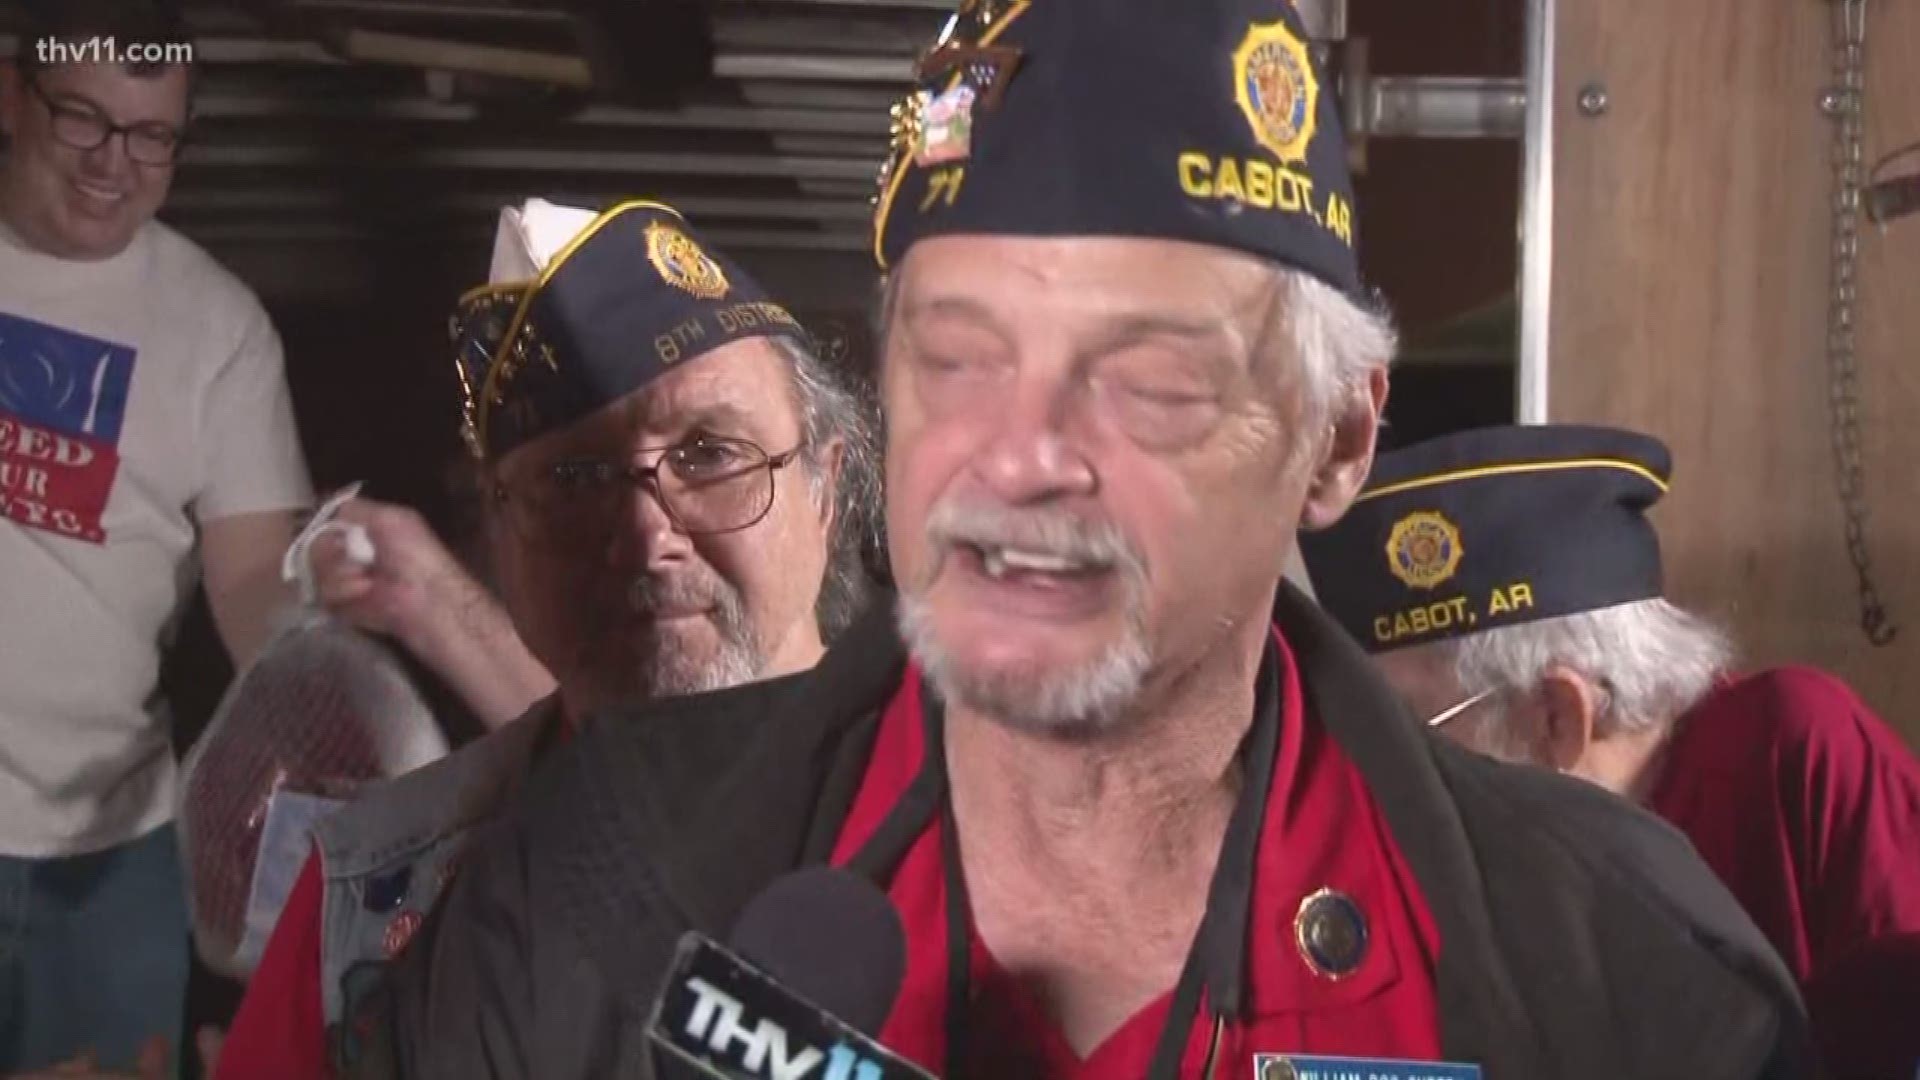 THV11's Craig O'Neill talks to the American Legion about their support to help feed veterans for the holidays.